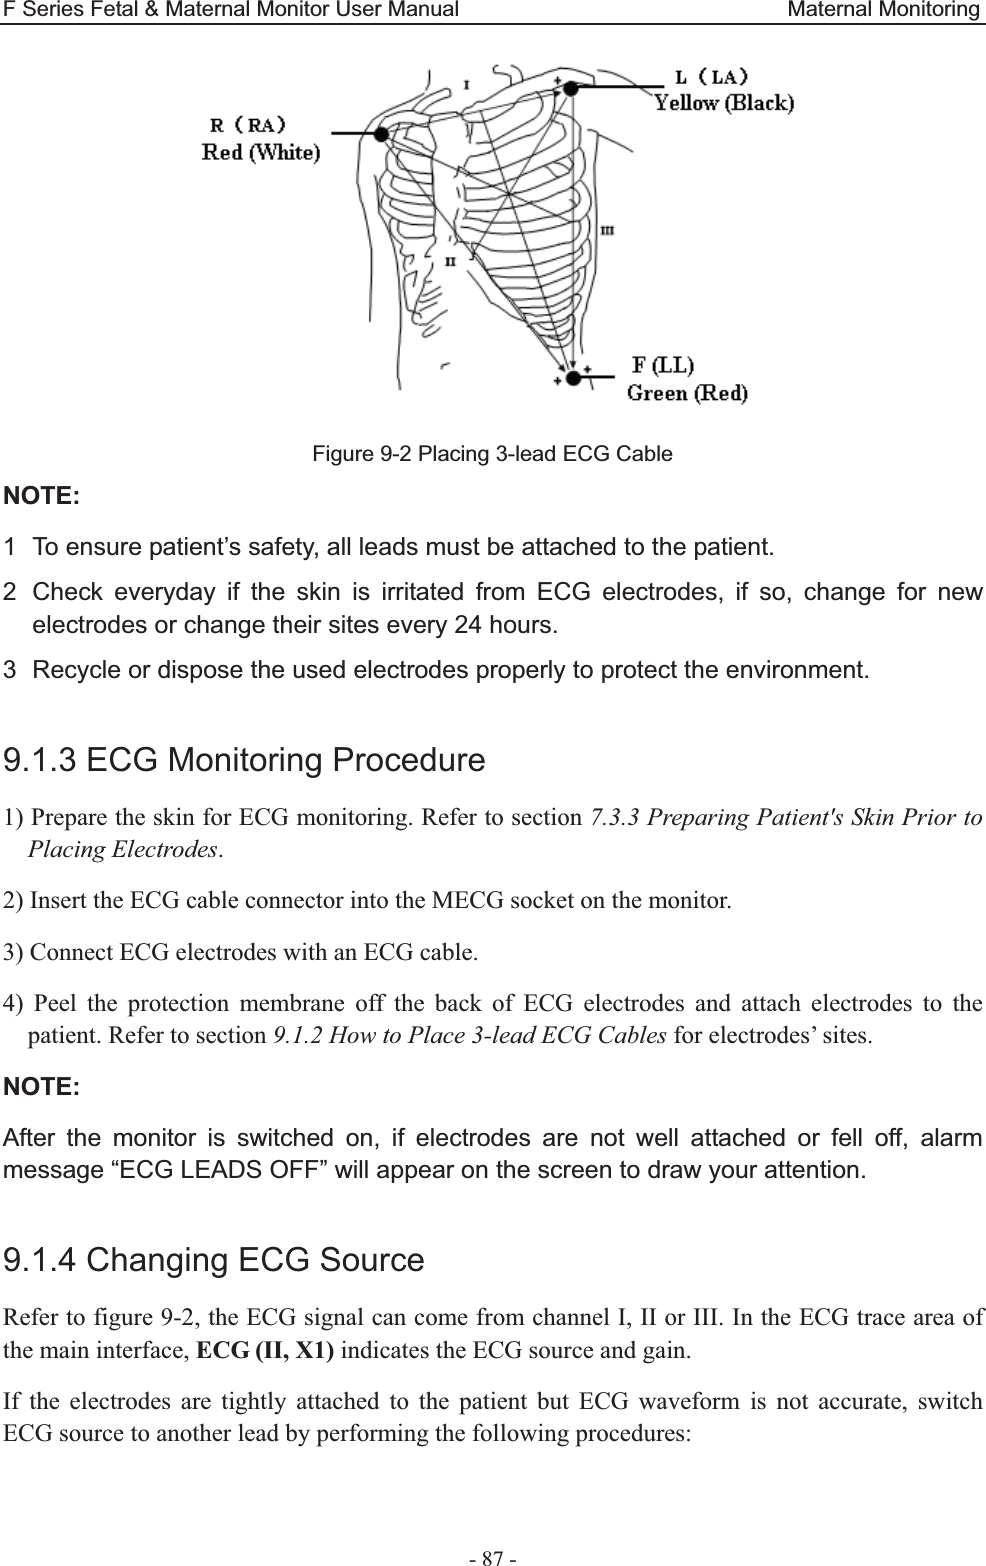 F Series Fetal &amp; Maternal Monitor User Manual                              Maternal Monitoring - 87 - Figure 9-2 Placing 3-lead ECG Cable NOTE:1  To ensure patient’s safety, all leads must be attached to the patient. 2  Check everyday if the skin is irritated from ECG electrodes, if so, change for new electrodes or change their sites every 24 hours. 3  Recycle or dispose the used electrodes properly to protect the environment.  9.1.3 ECG Monitoring Procedure 1) Prepare the skin for ECG monitoring. Refer to section 7.3.3 Preparing Patient&apos;s Skin Prior to Placing Electrodes. 2) Insert the ECG cable connector into the MECG socket on the monitor. 3) Connect ECG electrodes with an ECG cable. 4) Peel the protection membrane off the back of ECG electrodes and attach electrodes to the patient. Refer to section 9.1.2 How to Place 3-lead ECG Cables for electrodes’ sites. NOTE:After the monitor is switched on, if electrodes are not well attached or fell off, alarm message “ECG LEADS OFF” will appear on the screen to draw your attention.  9.1.4 Changing ECG Source Refer to figure 9-2, the ECG signal can come from channel I, II or III. In the ECG trace area of the main interface, ECG (II, X1) indicates the ECG source and gain. If the electrodes are tightly attached to the patient but ECG waveform is not accurate, switch ECG source to another lead by performing the following procedures:  